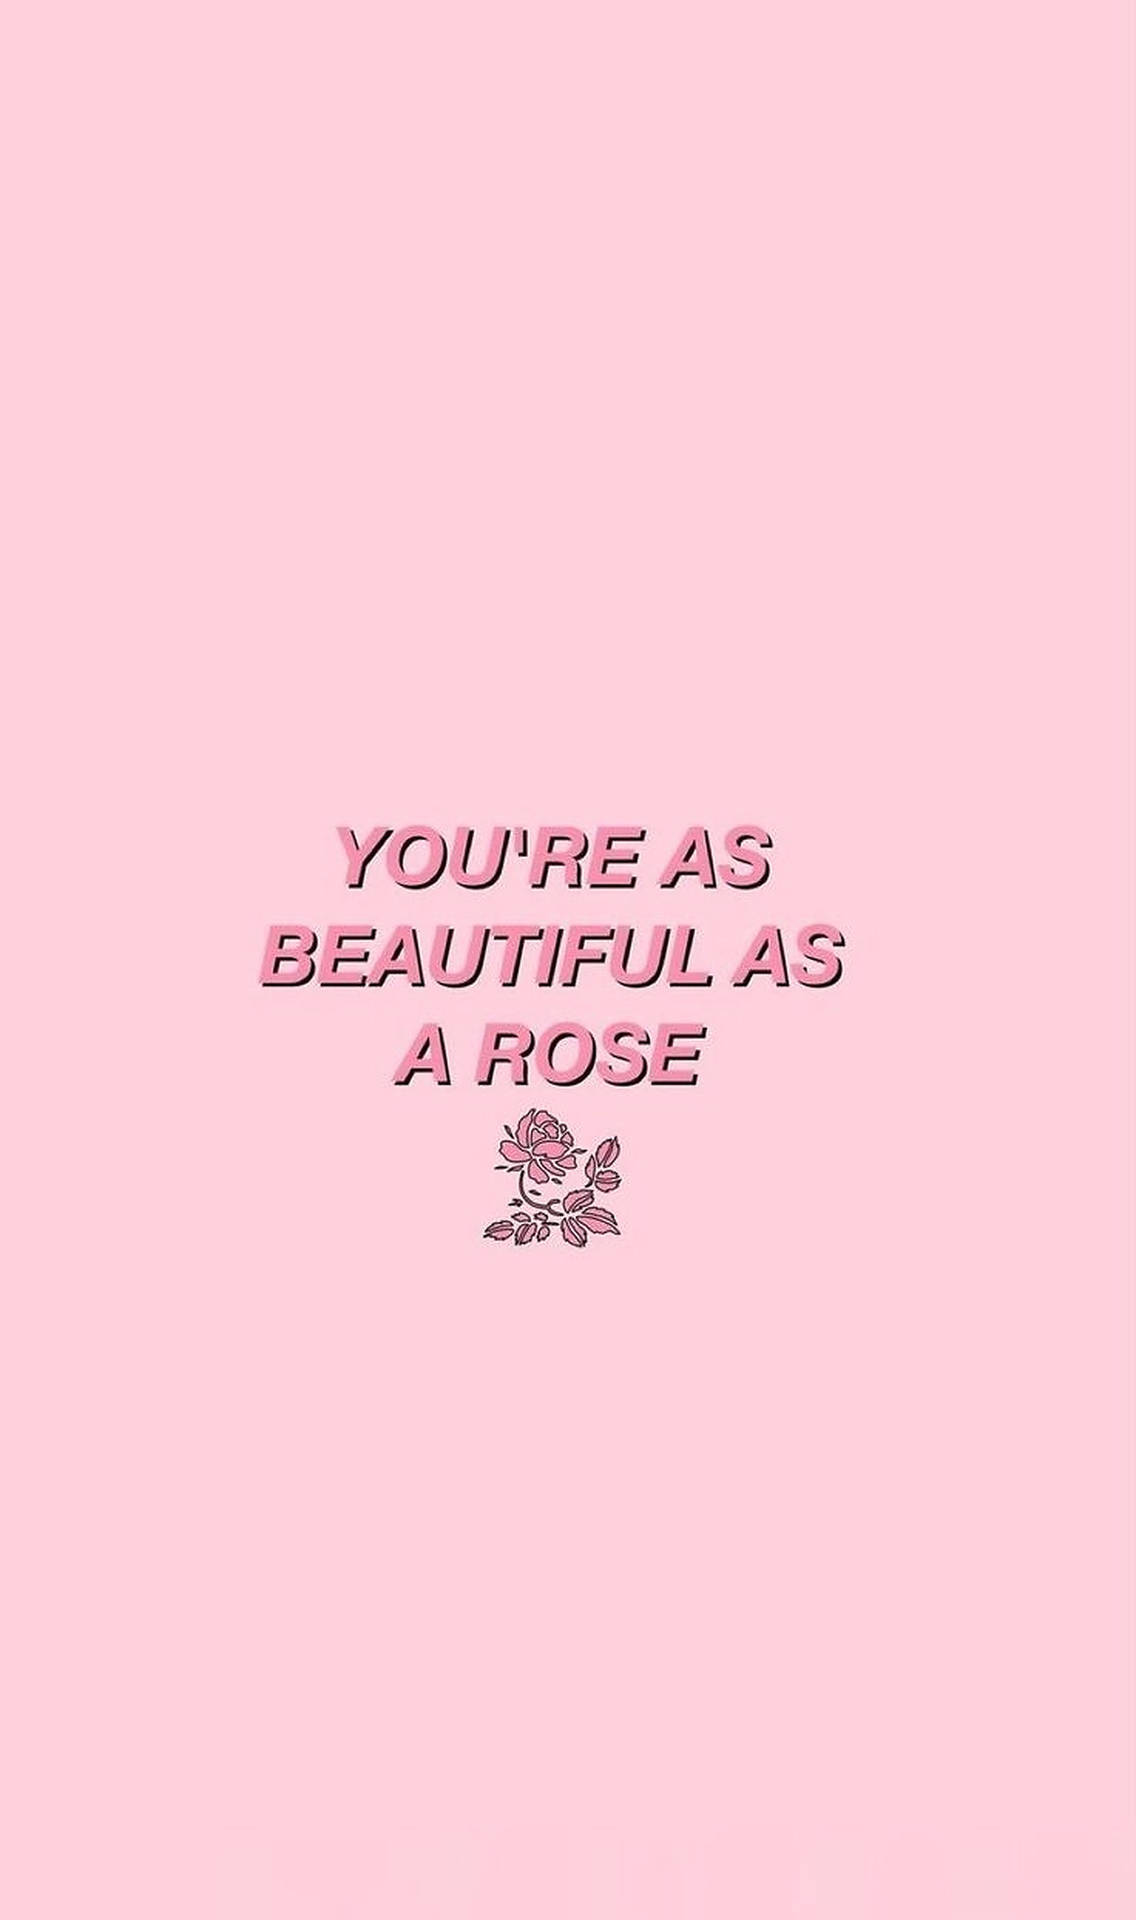 Pink Rose Aesthetic Words Background